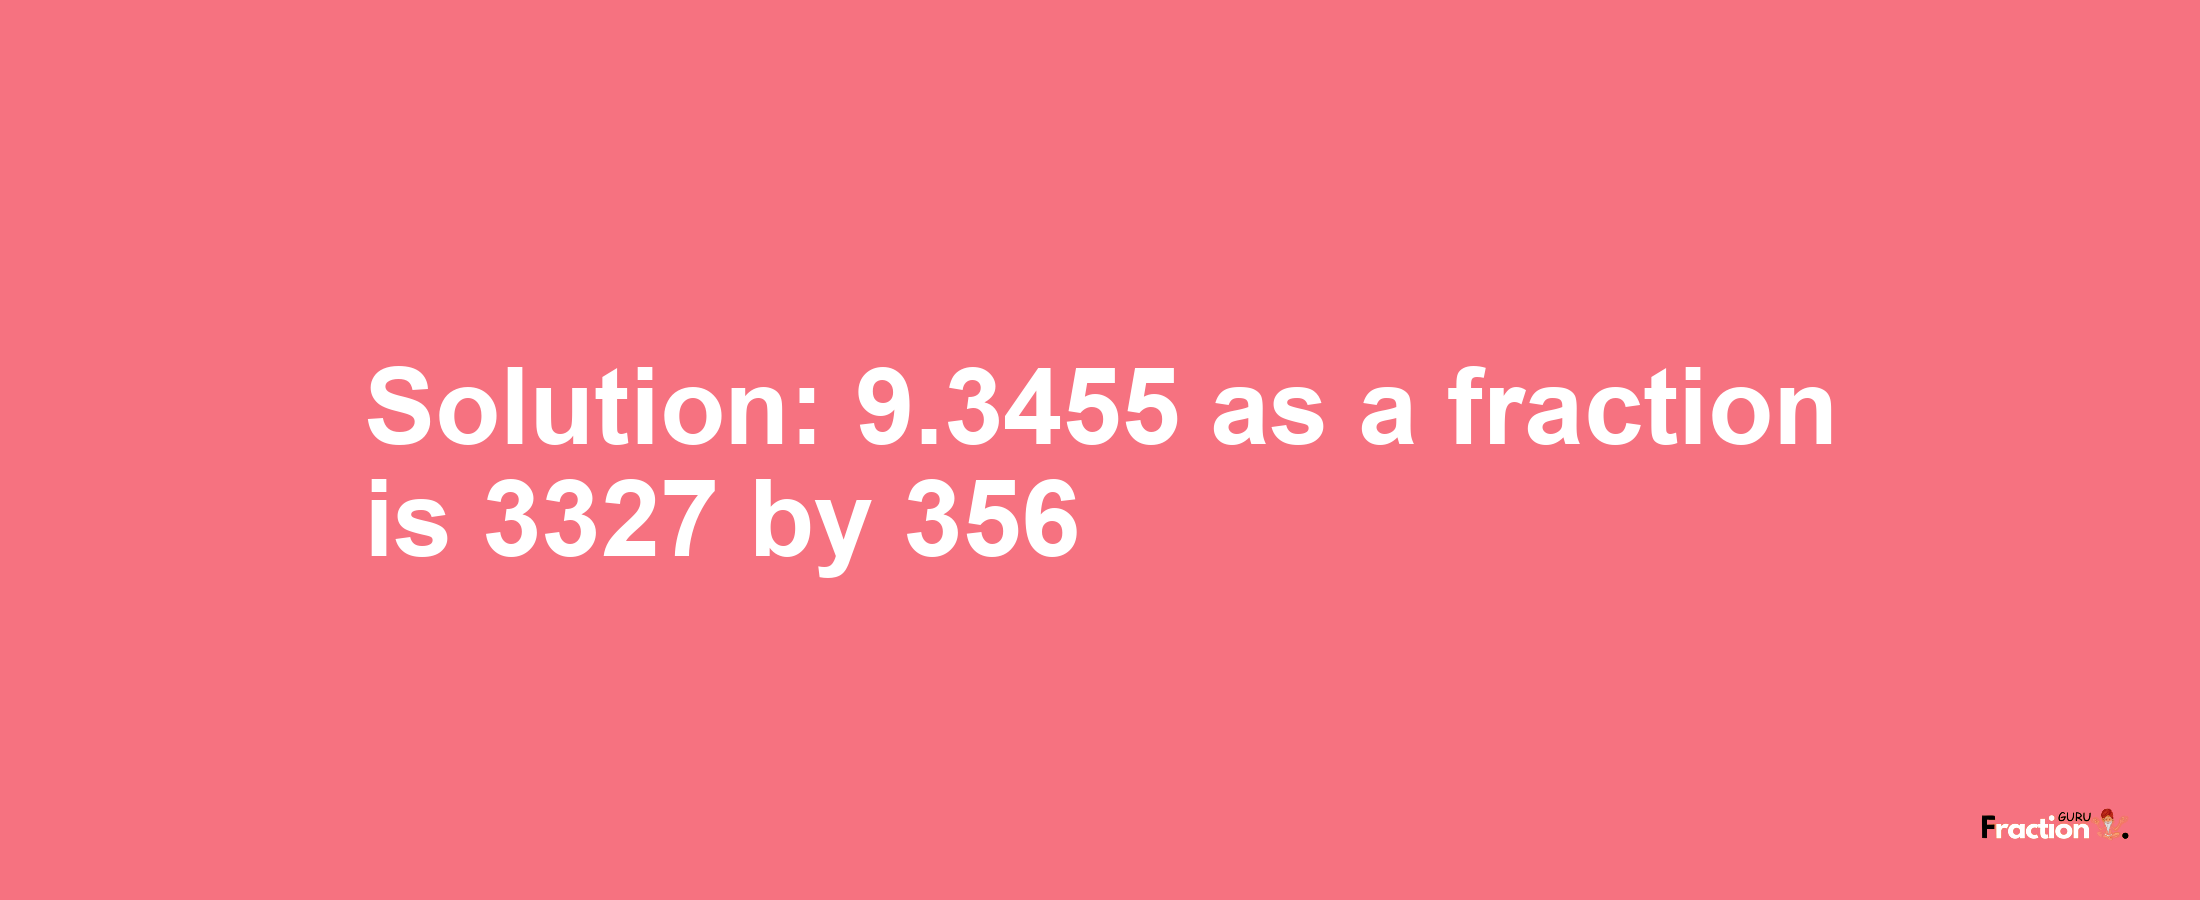 Solution:9.3455 as a fraction is 3327/356